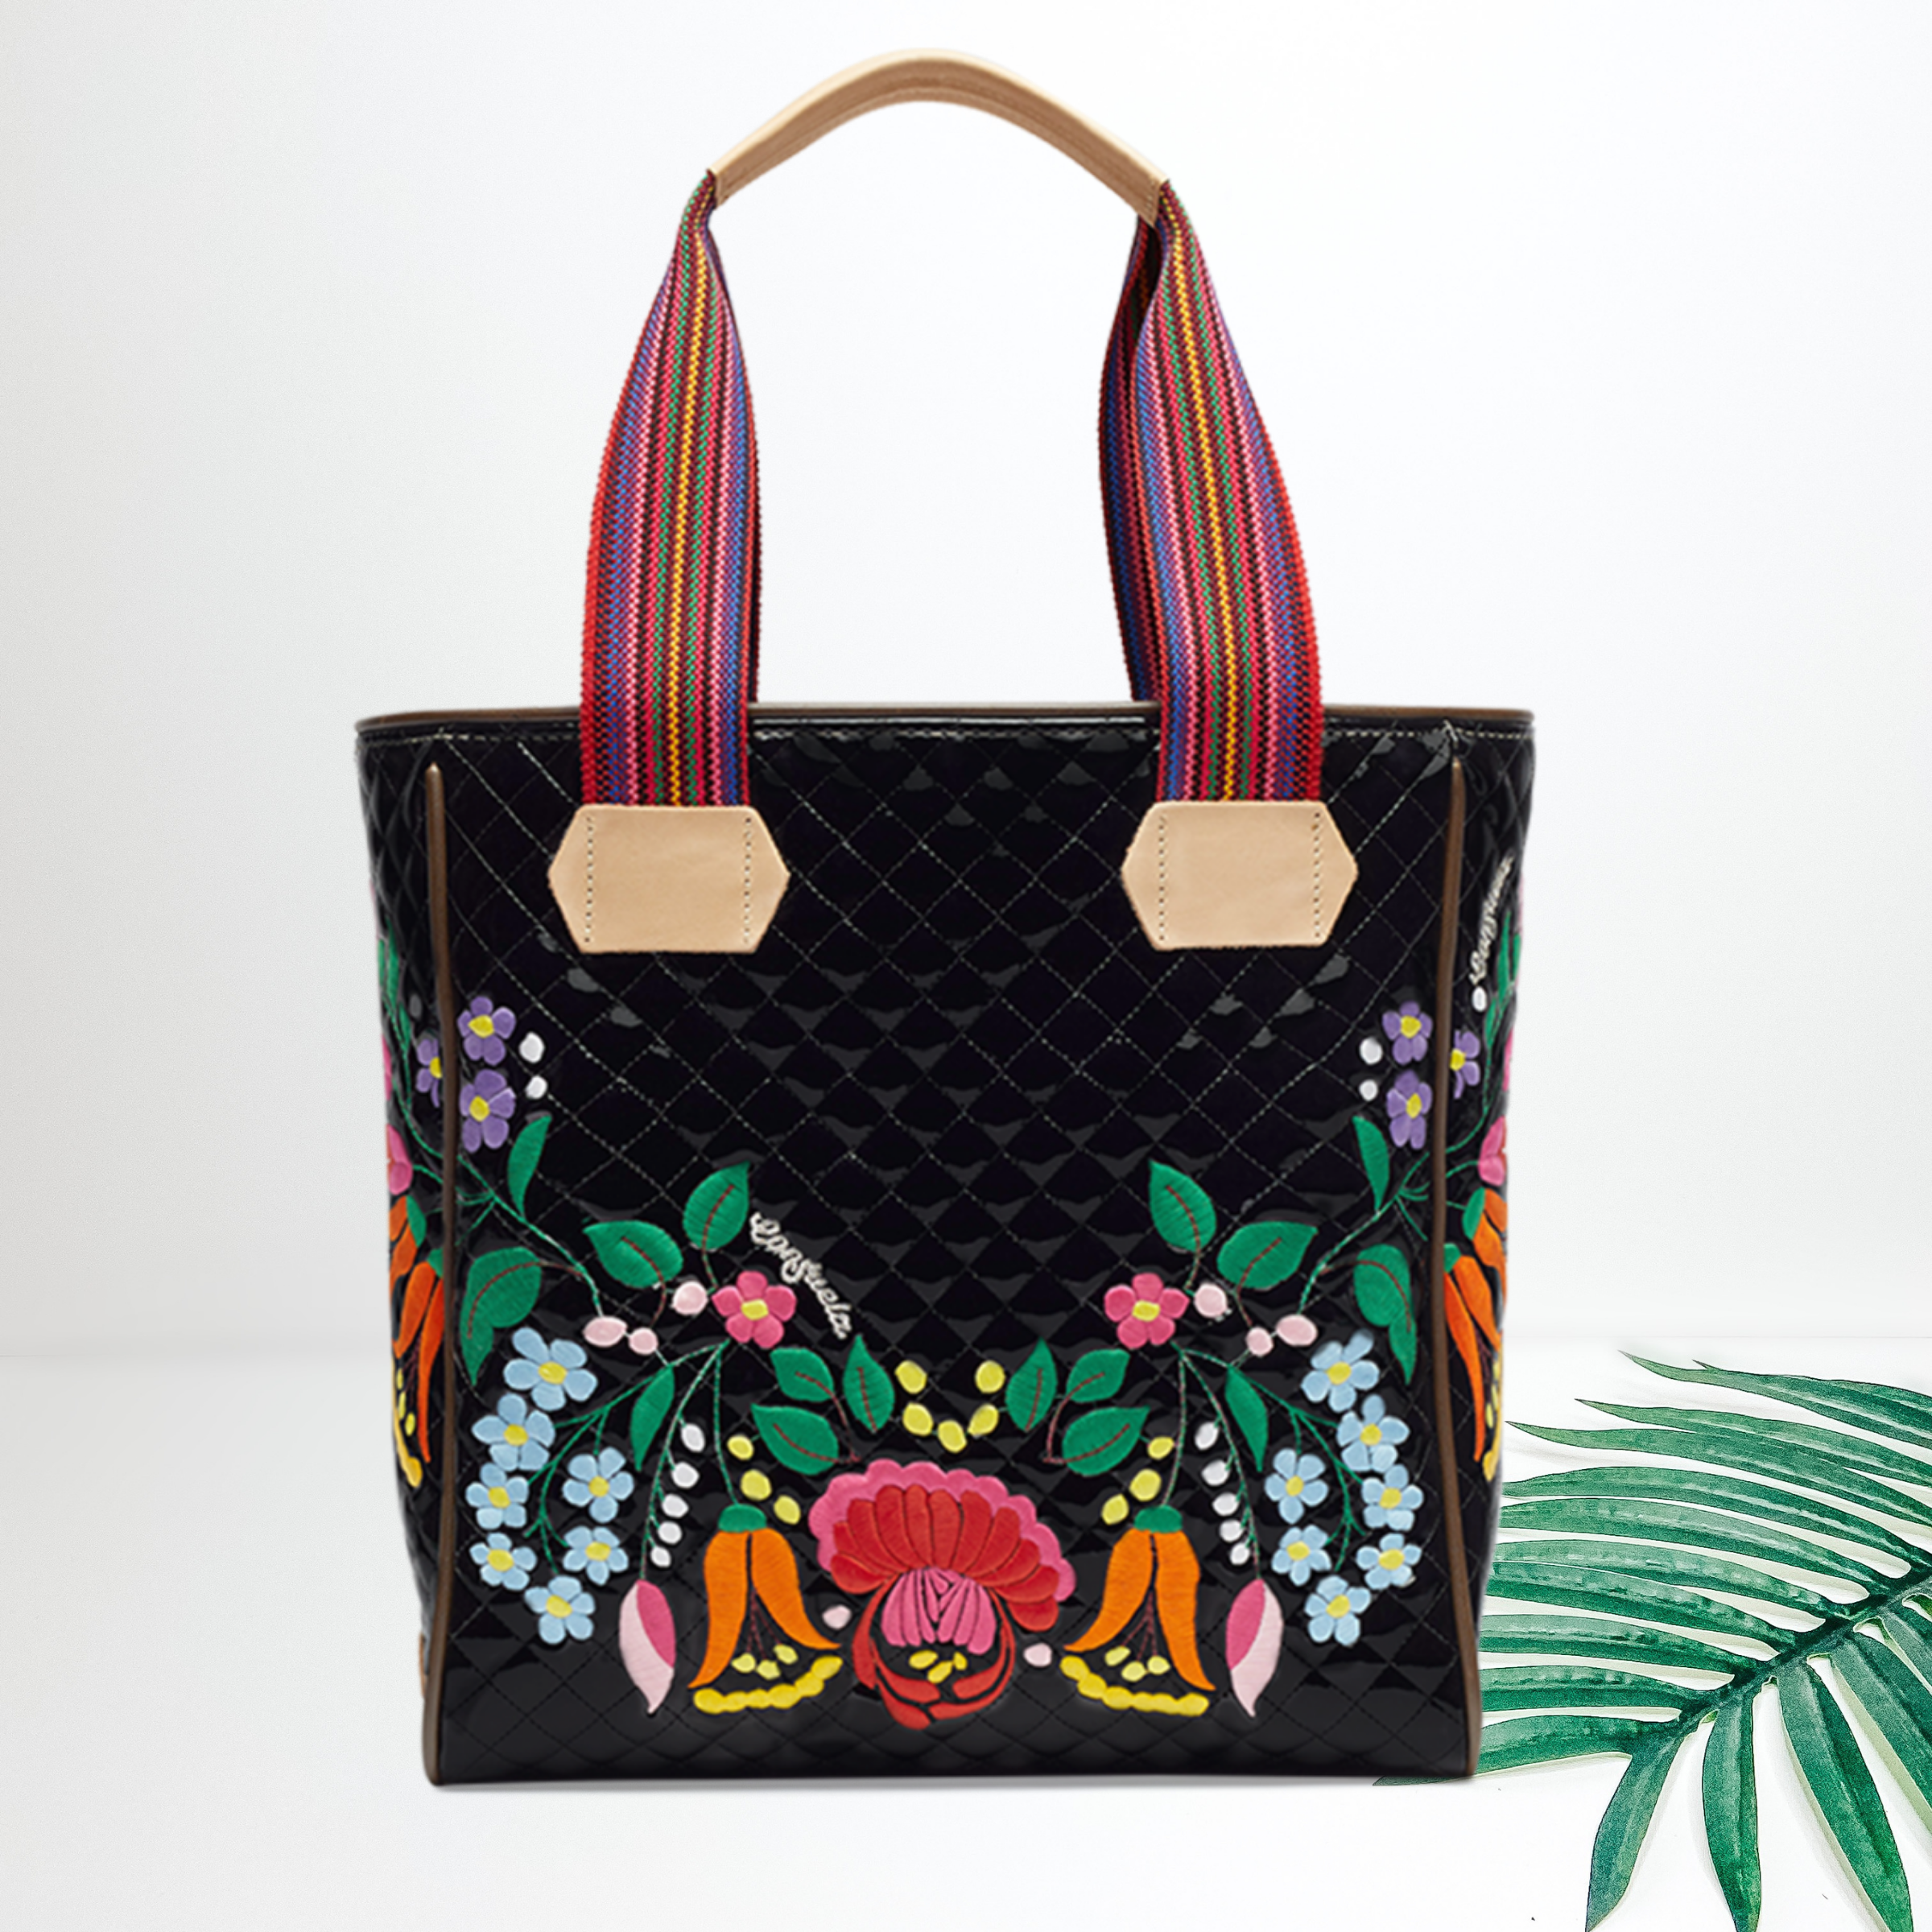 A black quilted tote bag with floral embroidery on the front. Pictured on white background with a palm leaf.